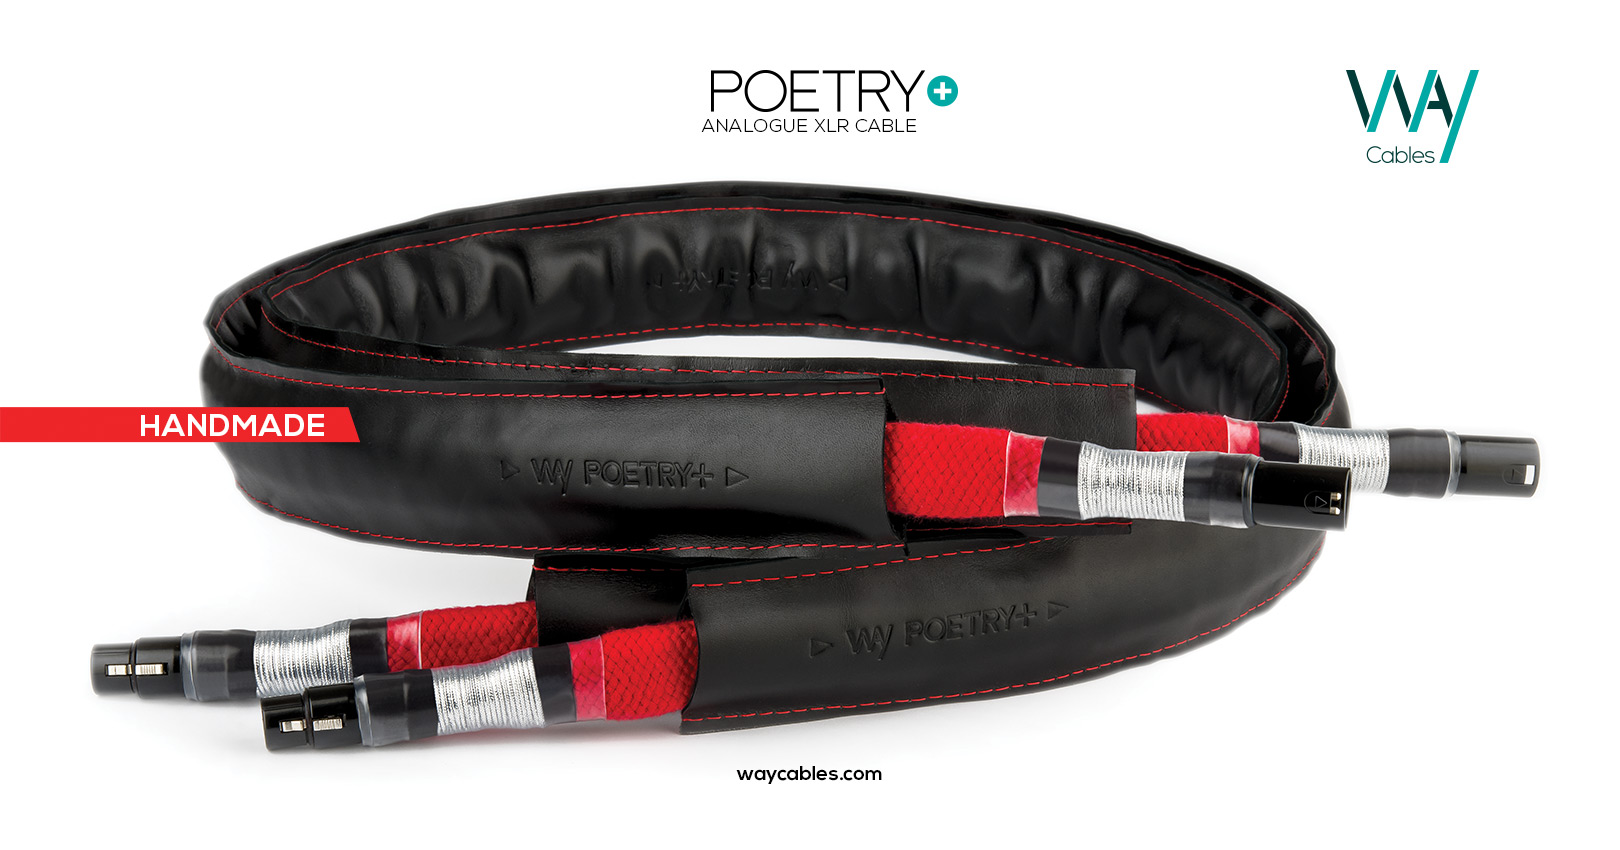 WayCables_Inter_Poetry 1